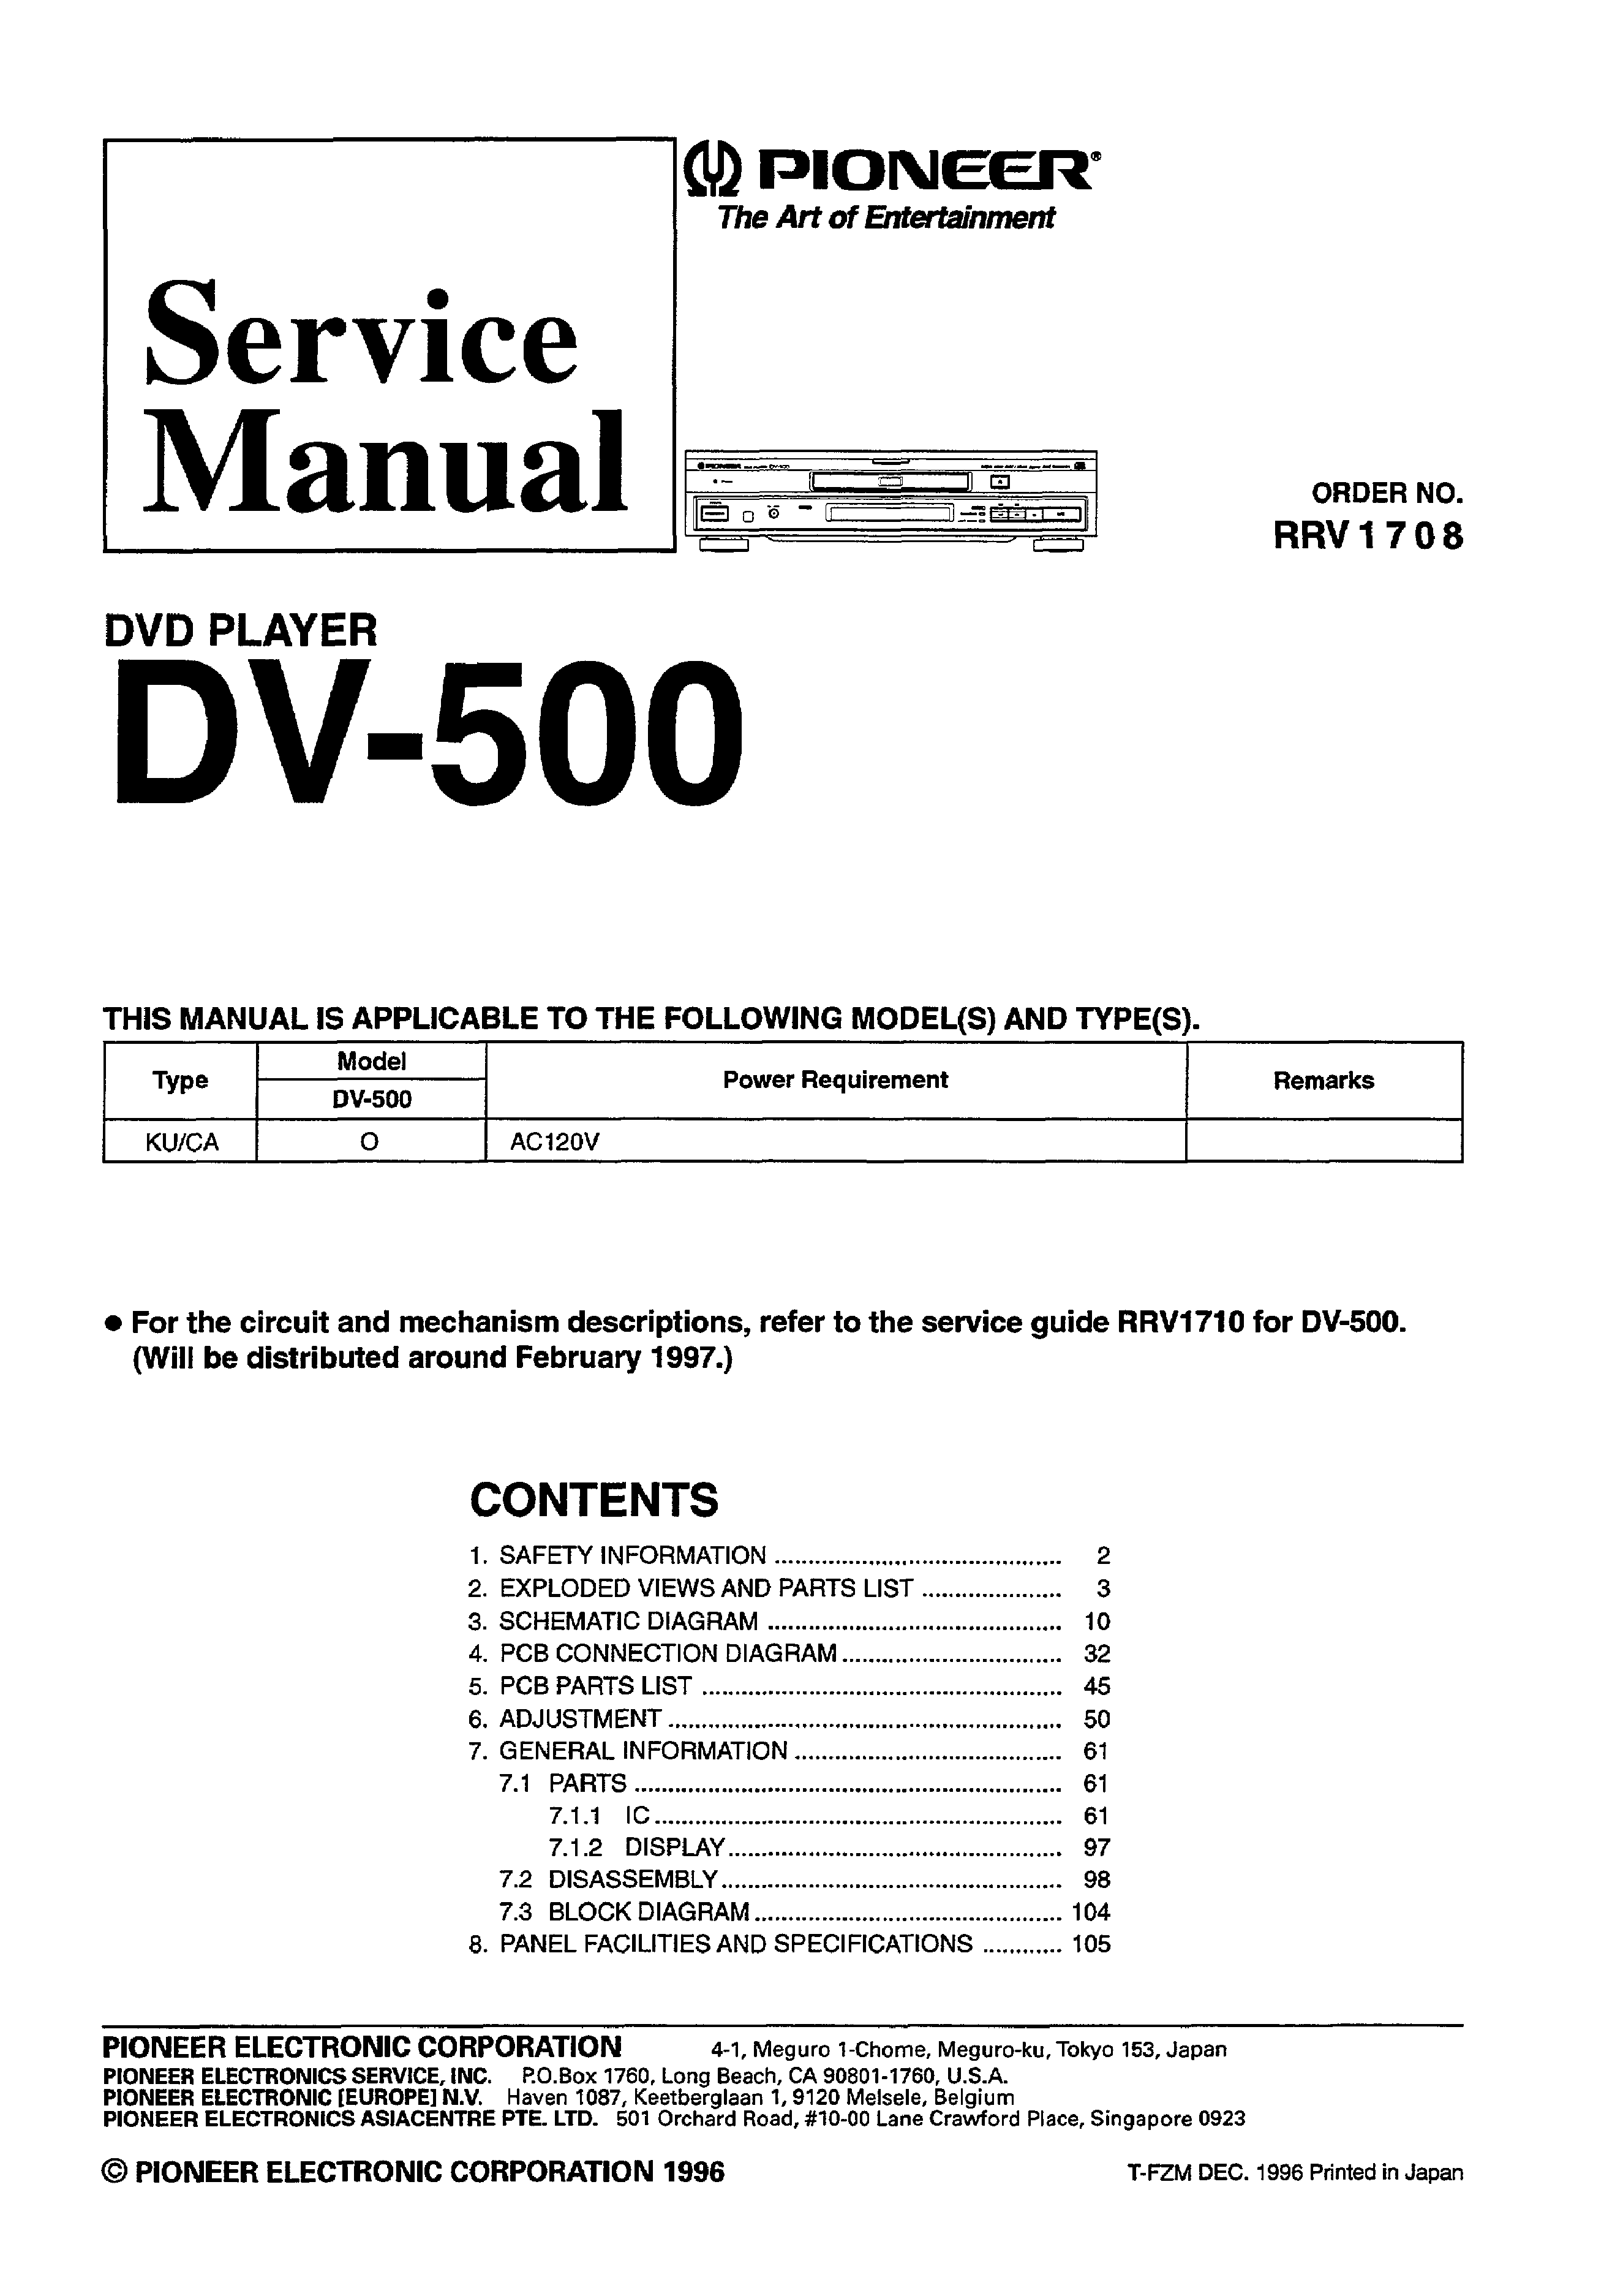 Service Manual for PIONEER DV-500 - Download